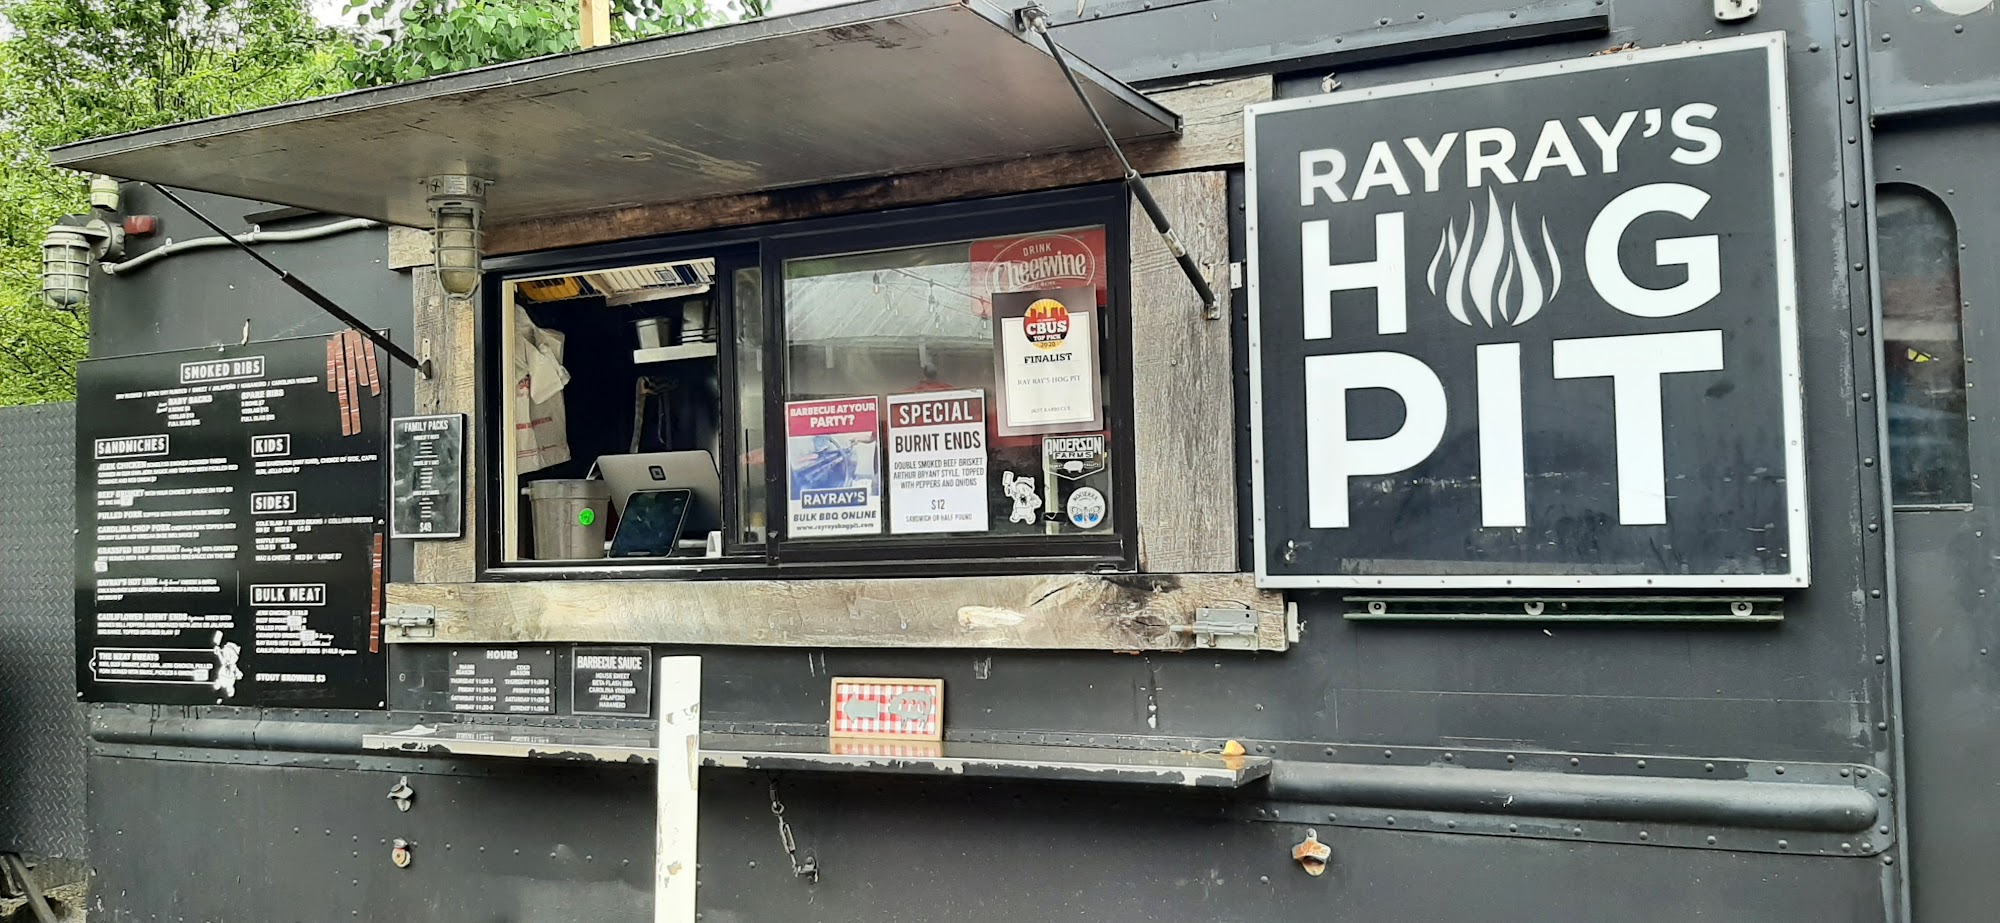 Ray Ray's Hog Pit Powell